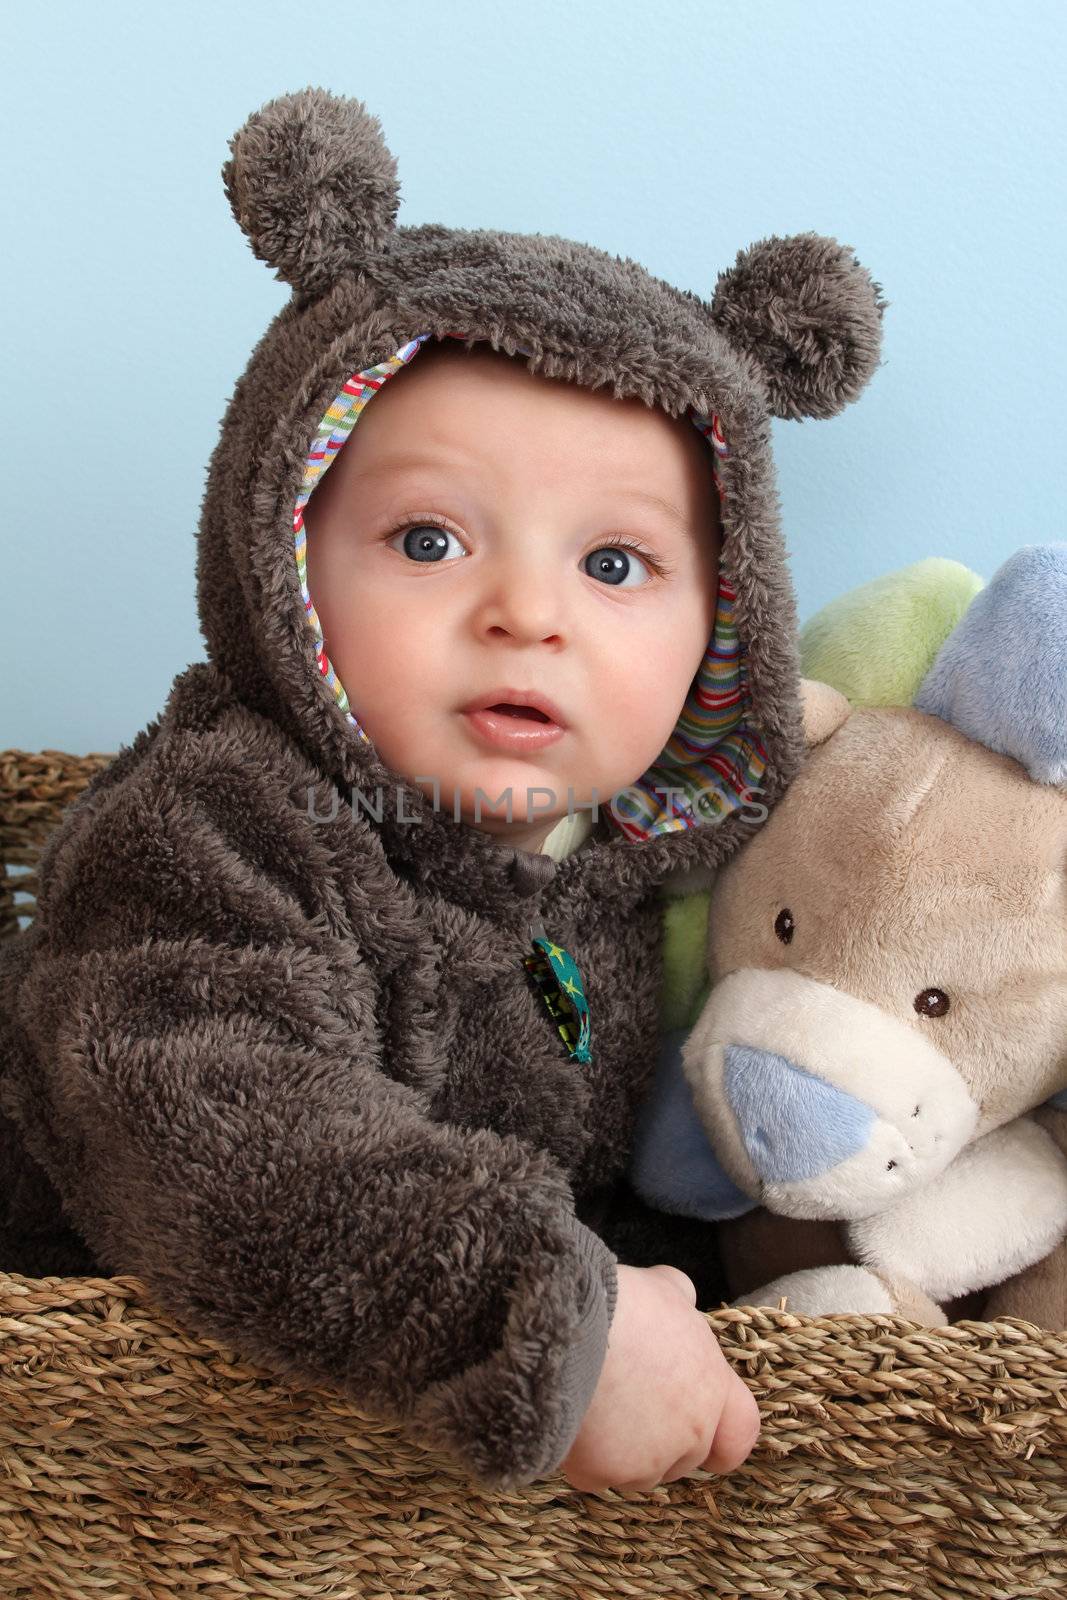 Bear Suit Baby by vanell